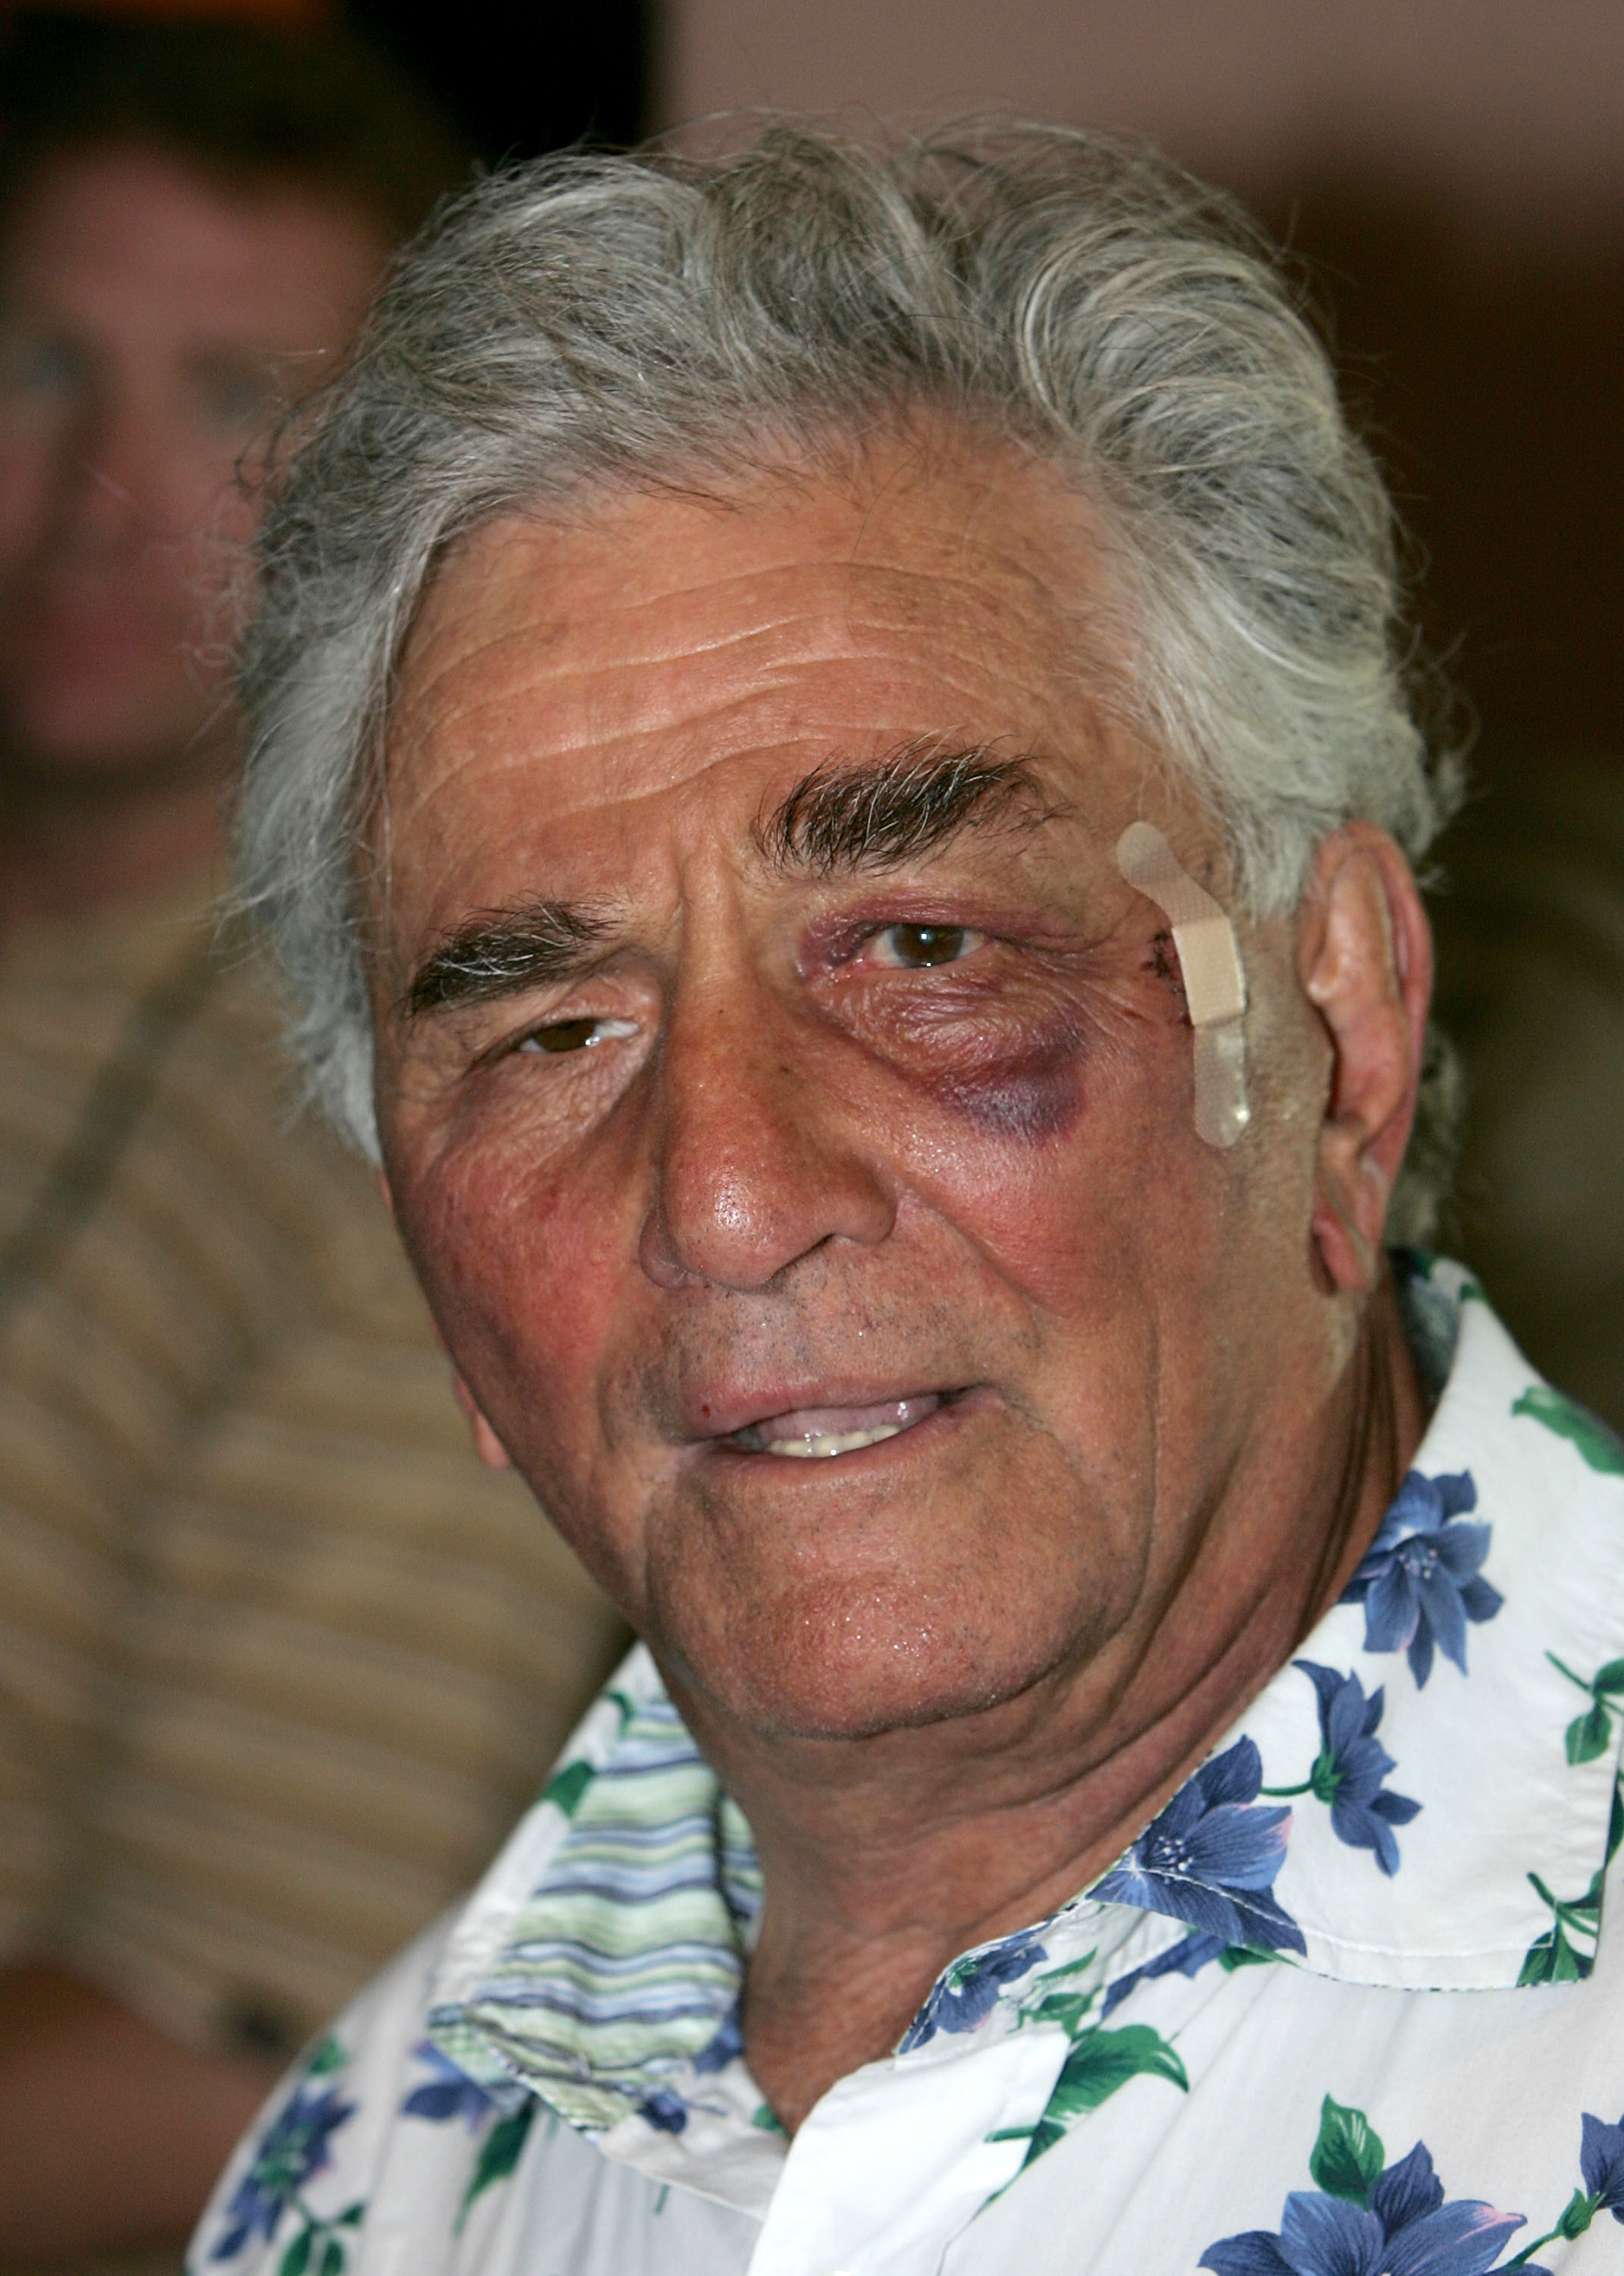 Peter Falk seen on July 20, 2005 | Source: Getty Images